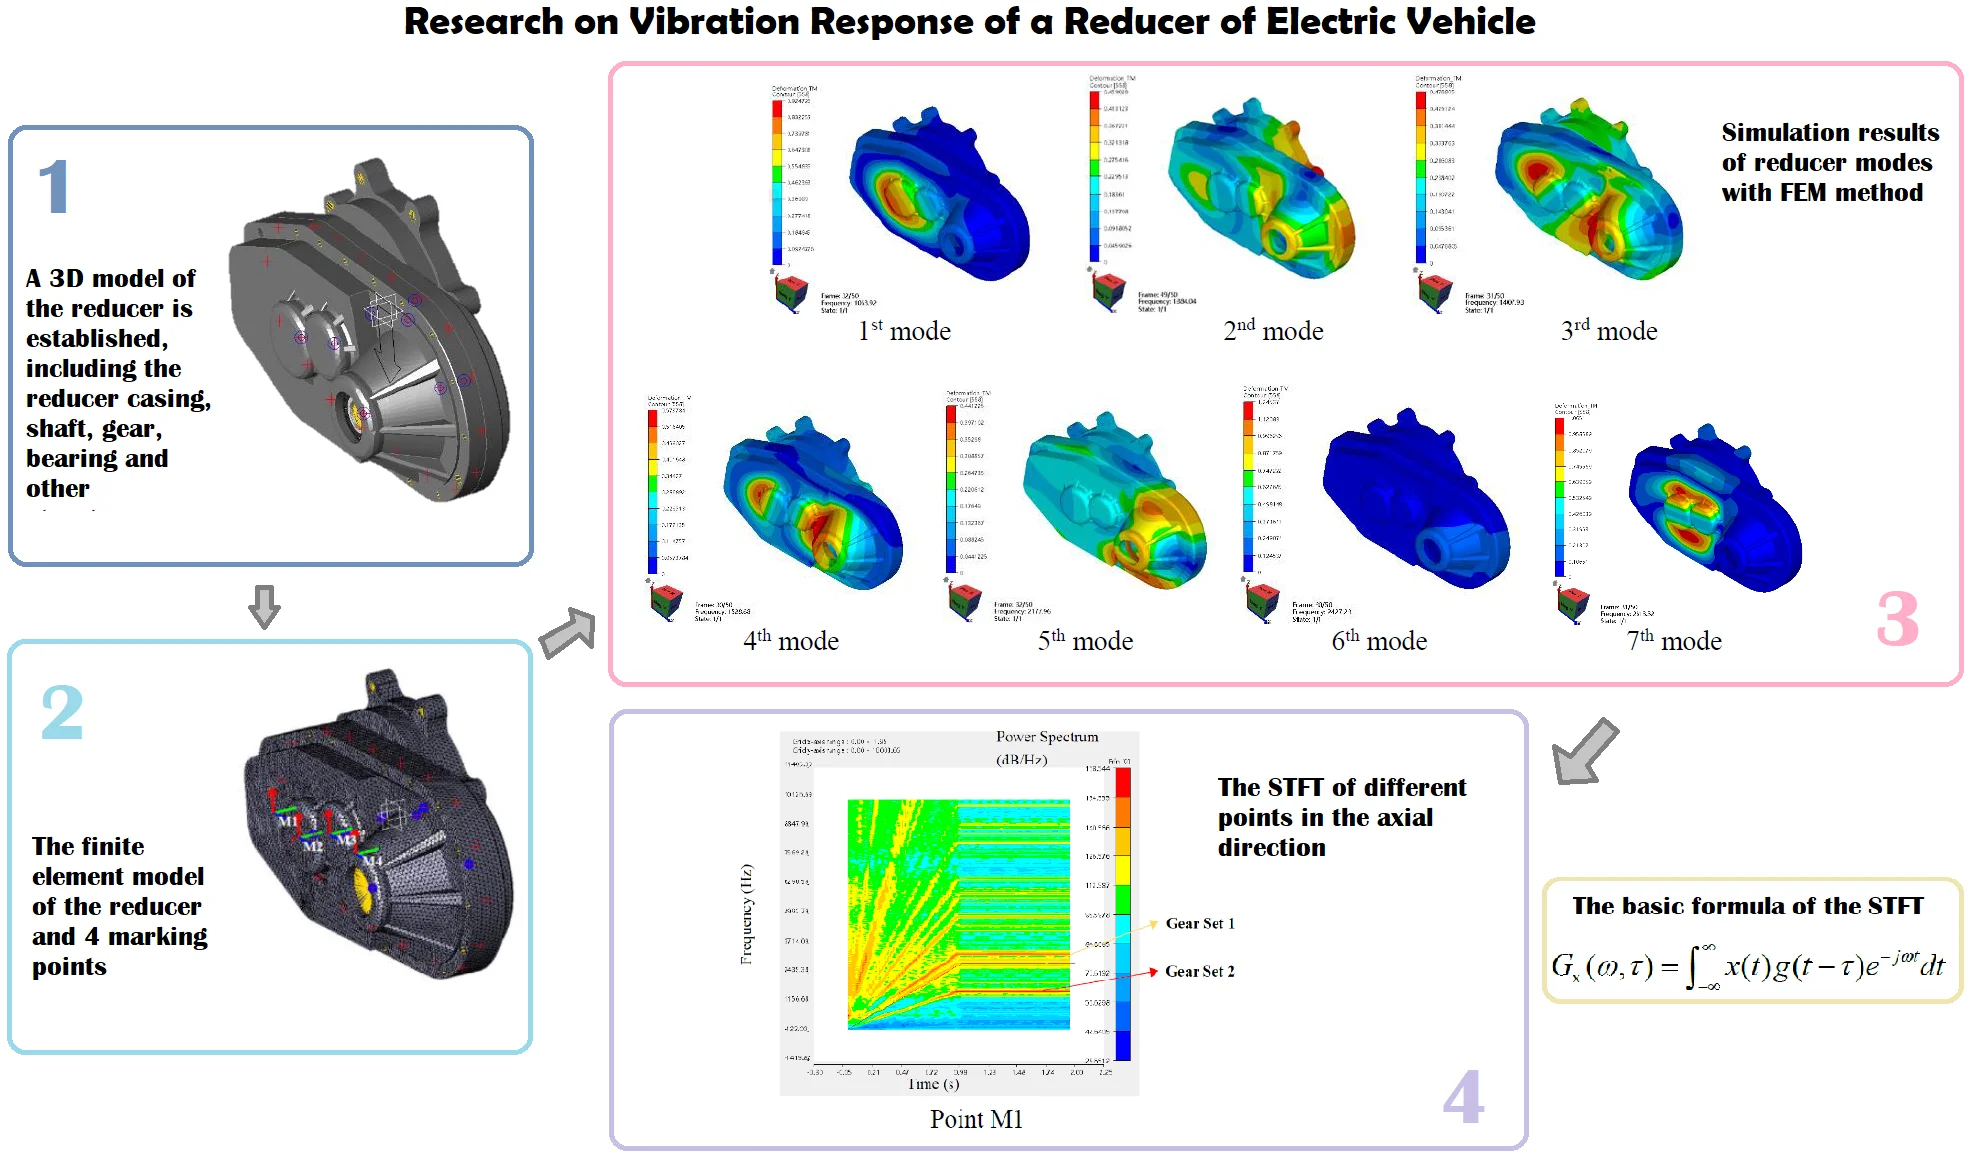 Research on vibration response of a reducer of electric vehicle